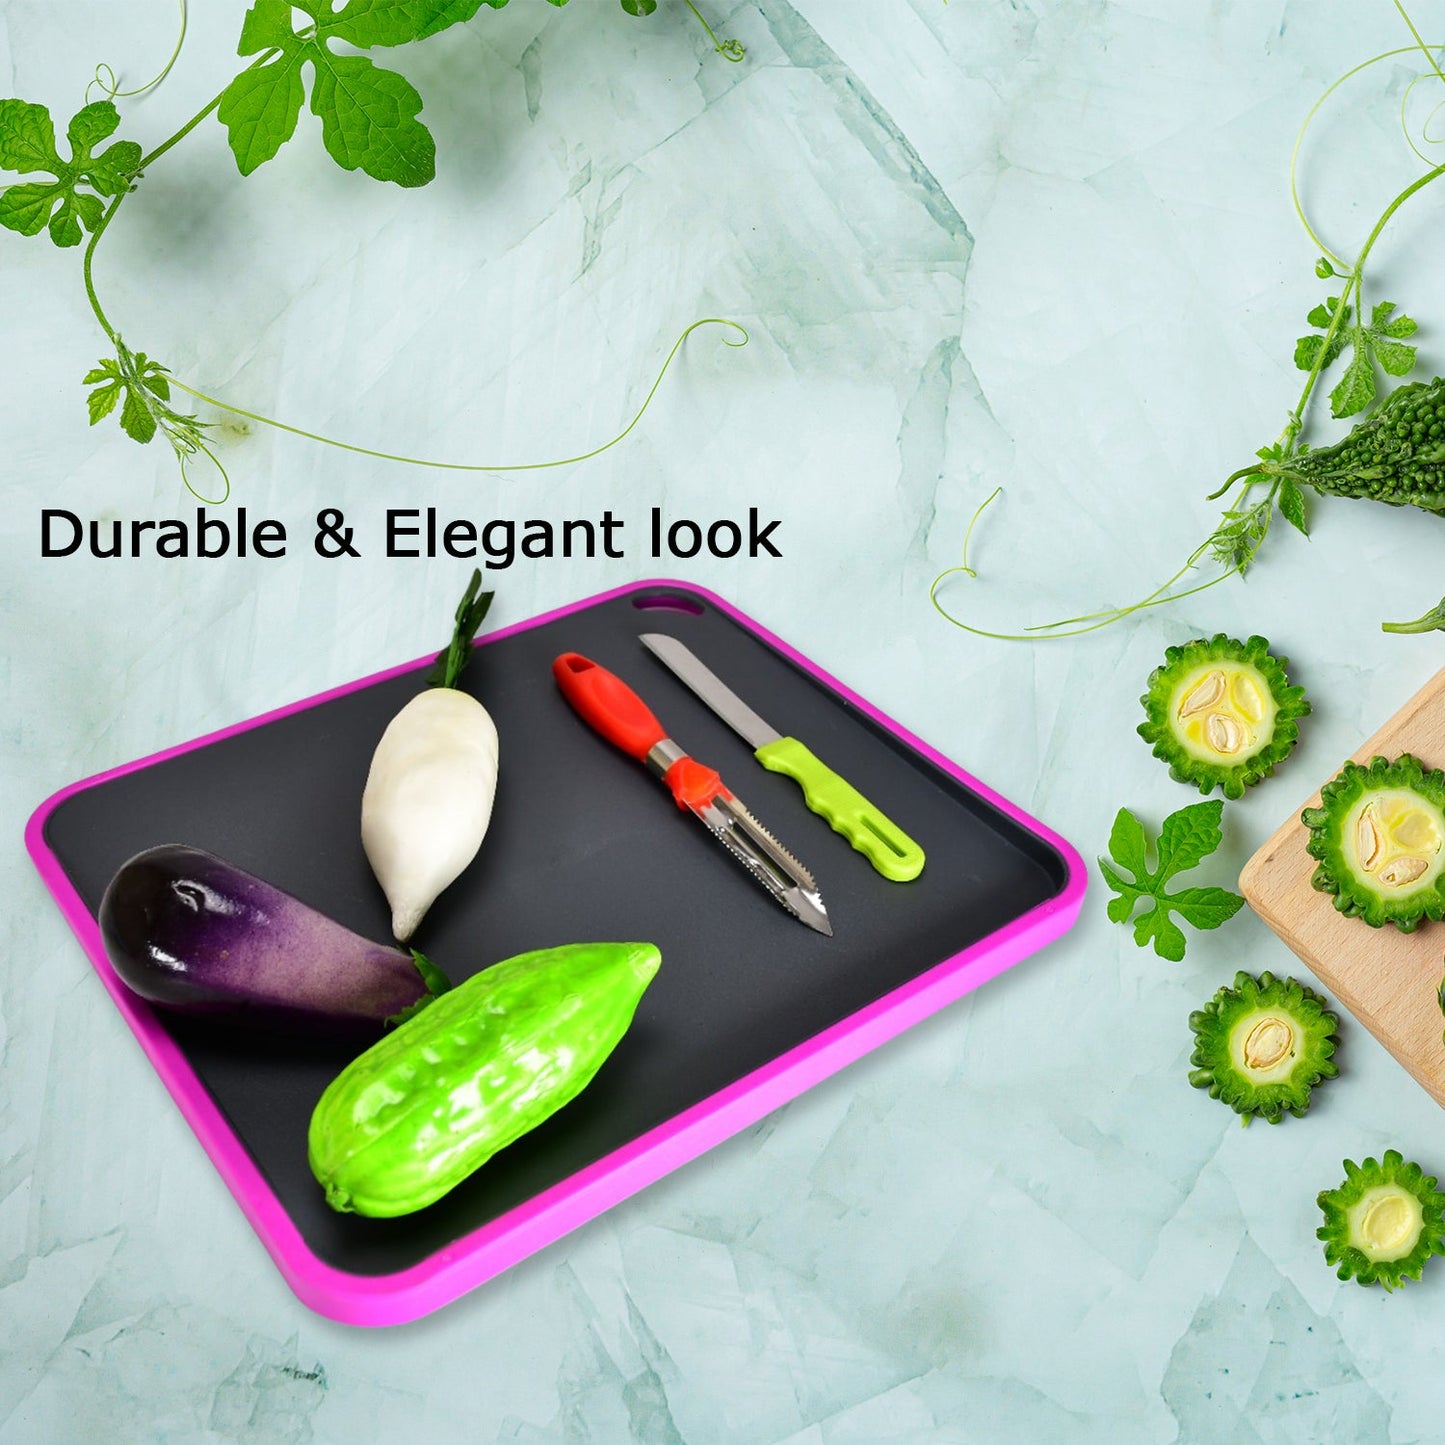 Vegetables and Fruits Cutting Chopping Board Non-slip Antibacterial Surface with Extra Thickness